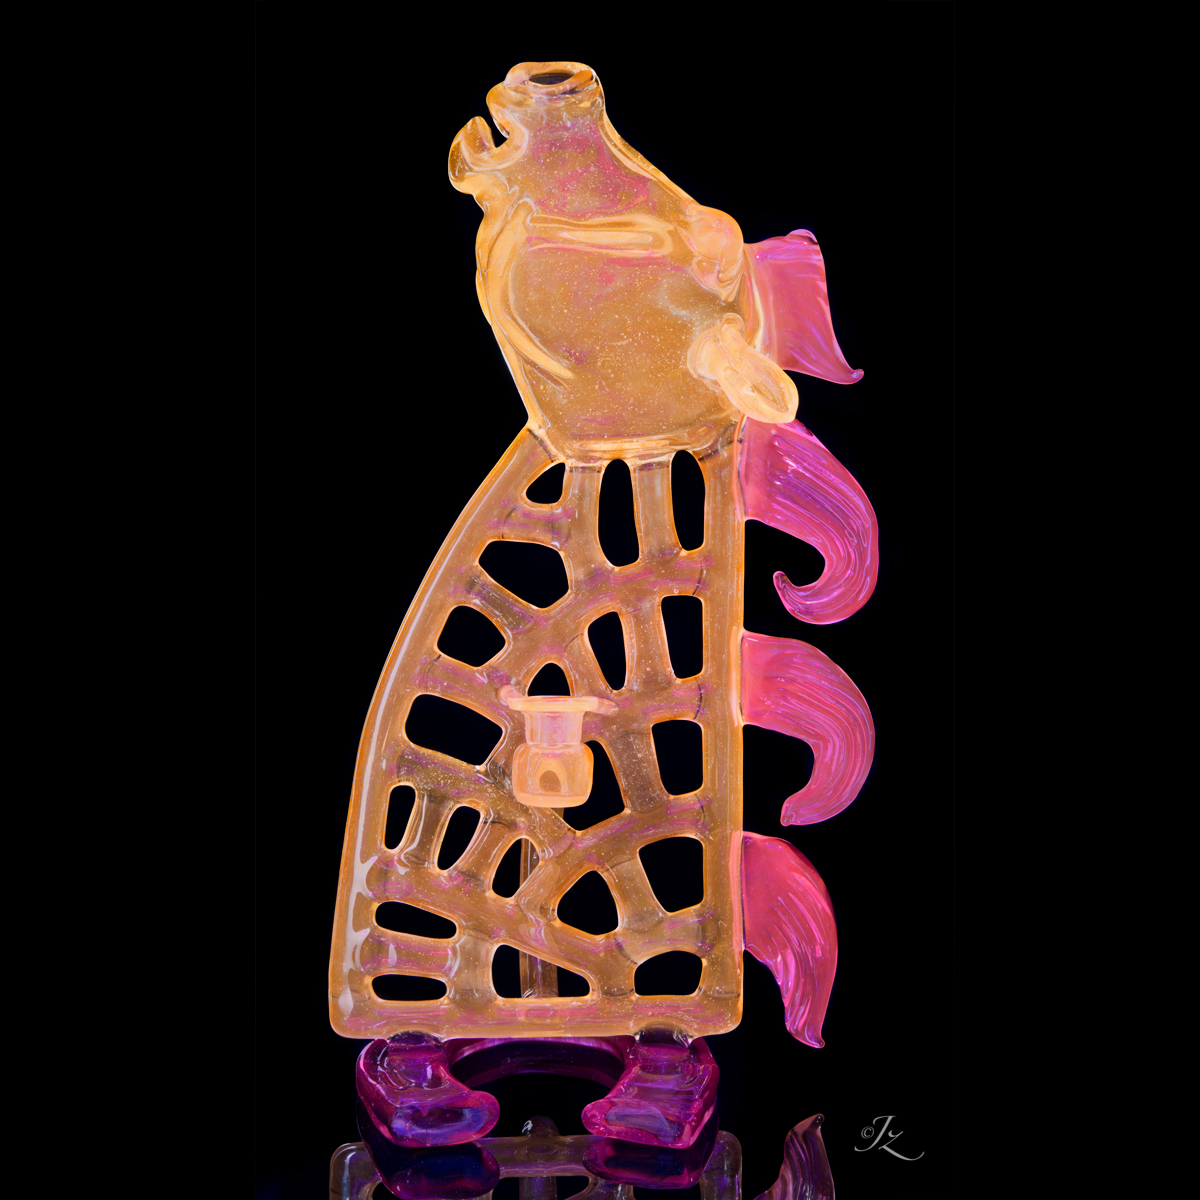  A Collaboration with Justin Knöferl, entitled “Lucky Peach Pegasus” it can be viewed currently at Illuzions Glass Gallery in Denver, CO    